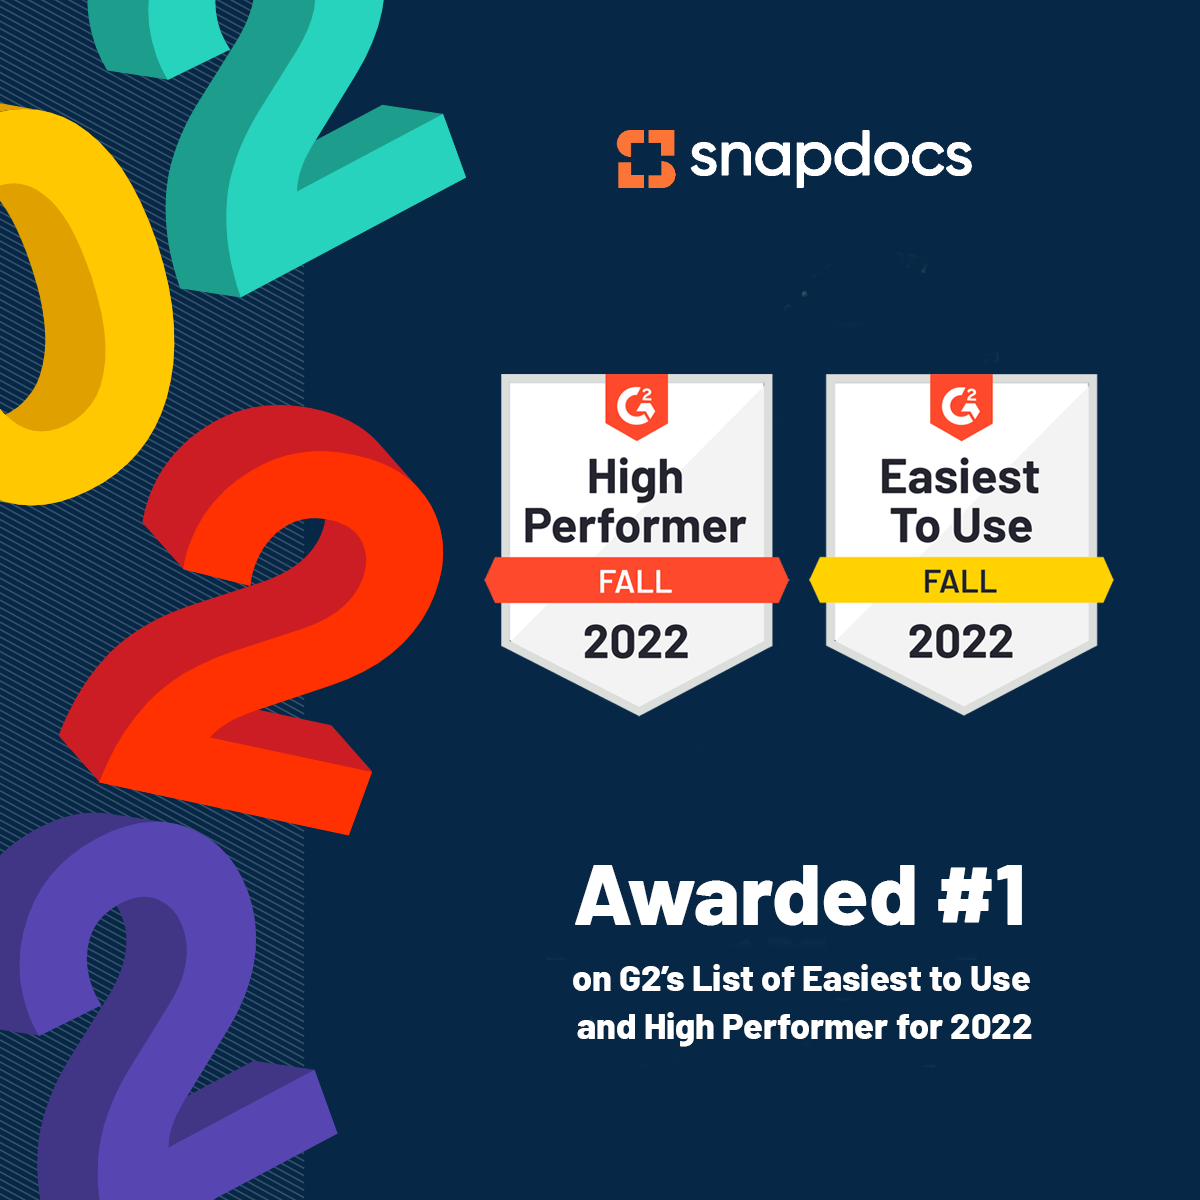 Snapdocs Ranked #1 Easiest to Use Digital Mortgage Closing Platform in New G2 Report